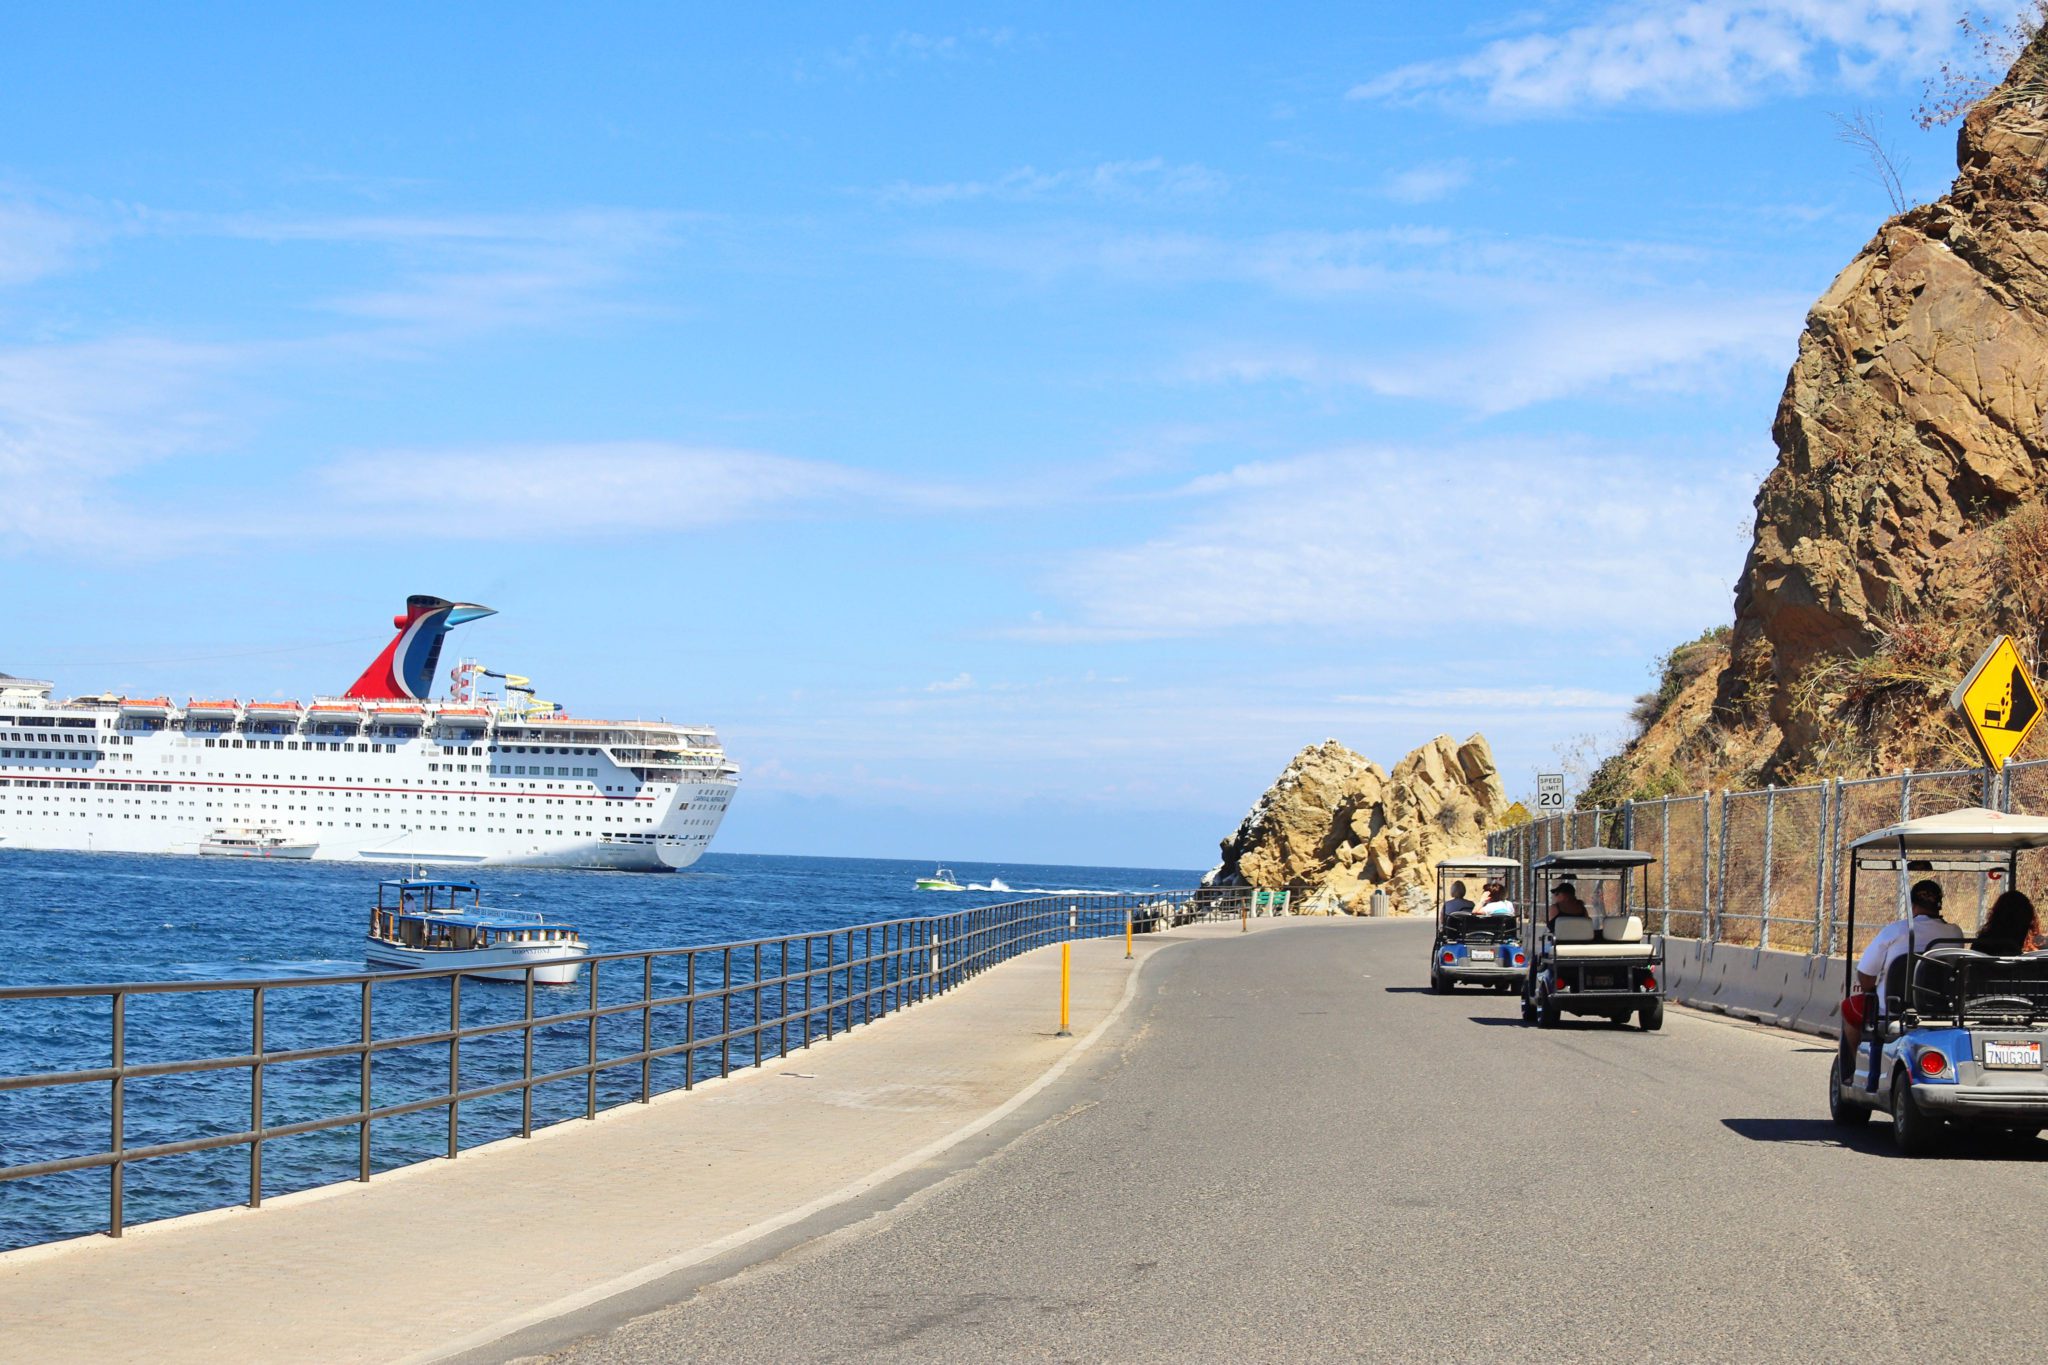 Tips for renting a golf cart on Catalina Island | 6 awesome things to do on Catalina Island | A Day Trip on Catalina Island #catalinaisland #california #simplywander